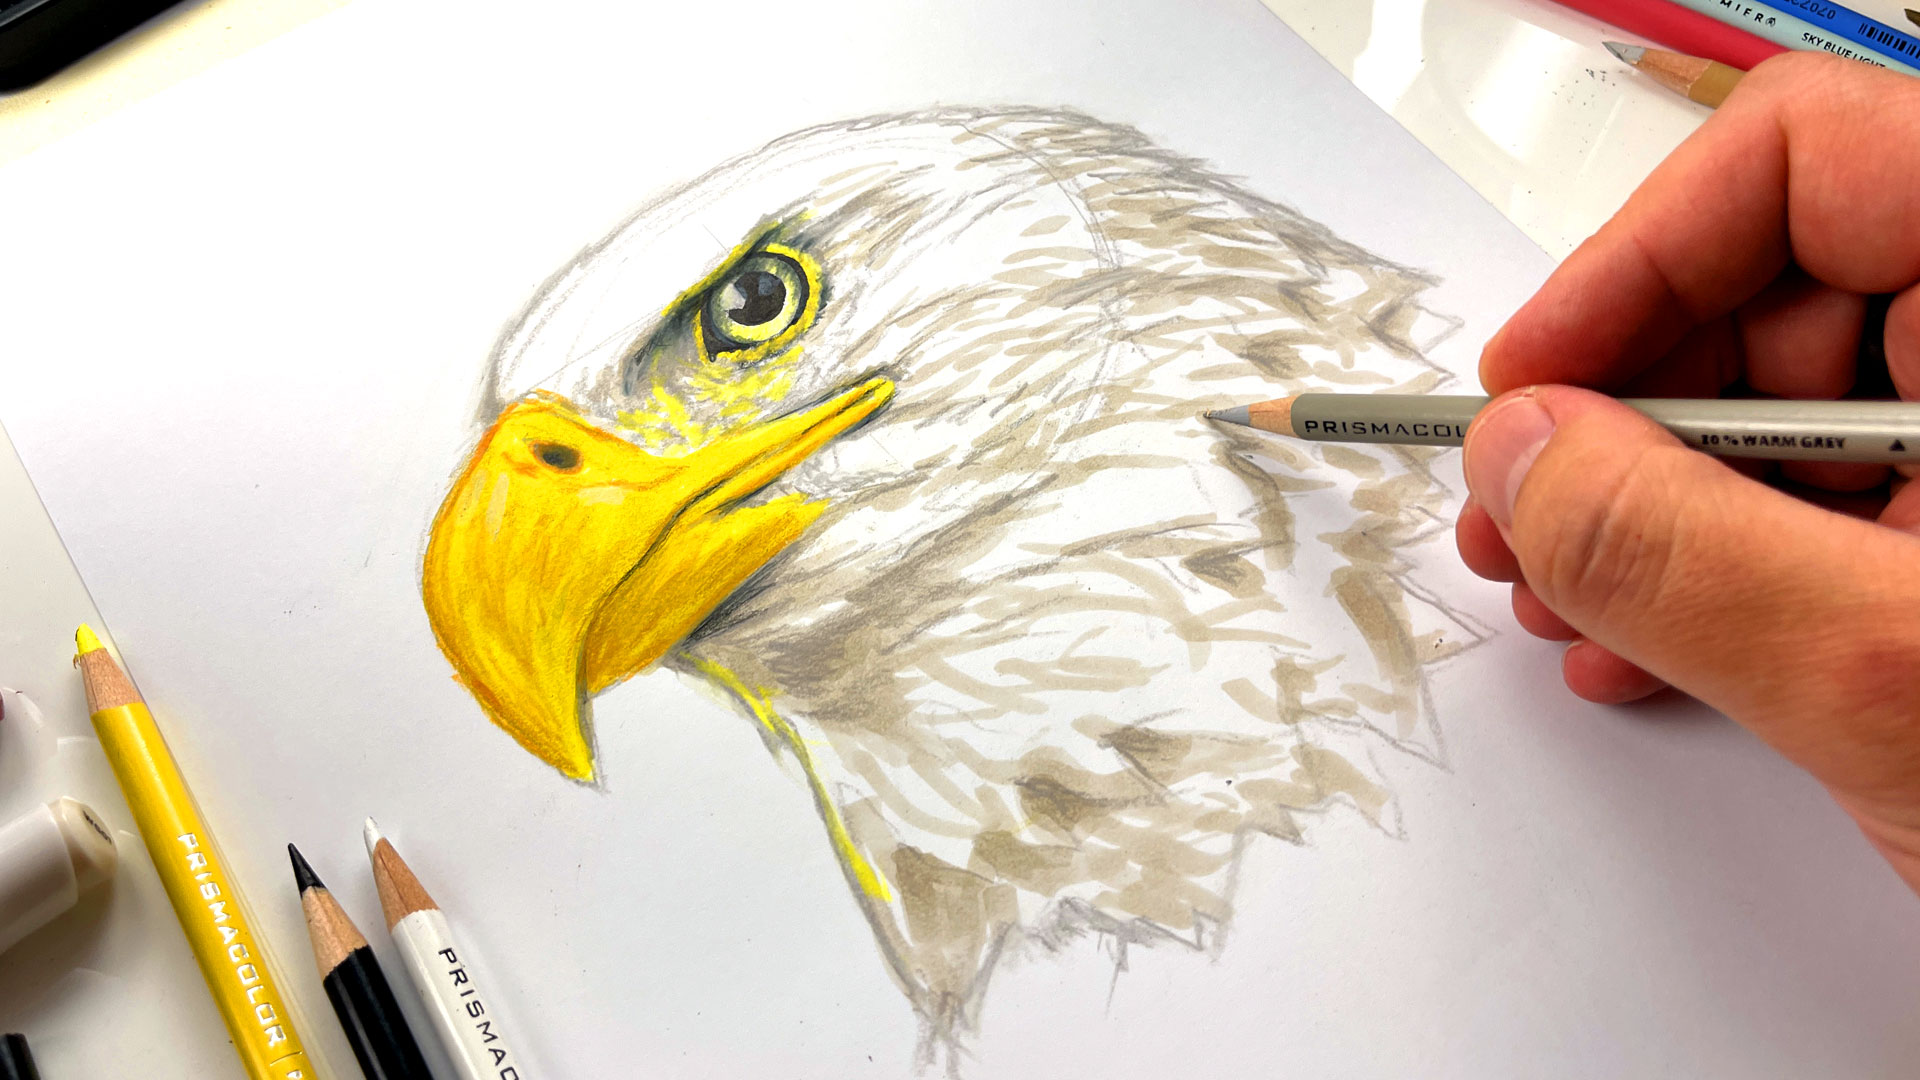 Eagle pencil drawing - Tahlia paige - Drawings & Illustration, Animals,  Birds, & Fish, Birds, Eagles, Other Eagles - ArtPal